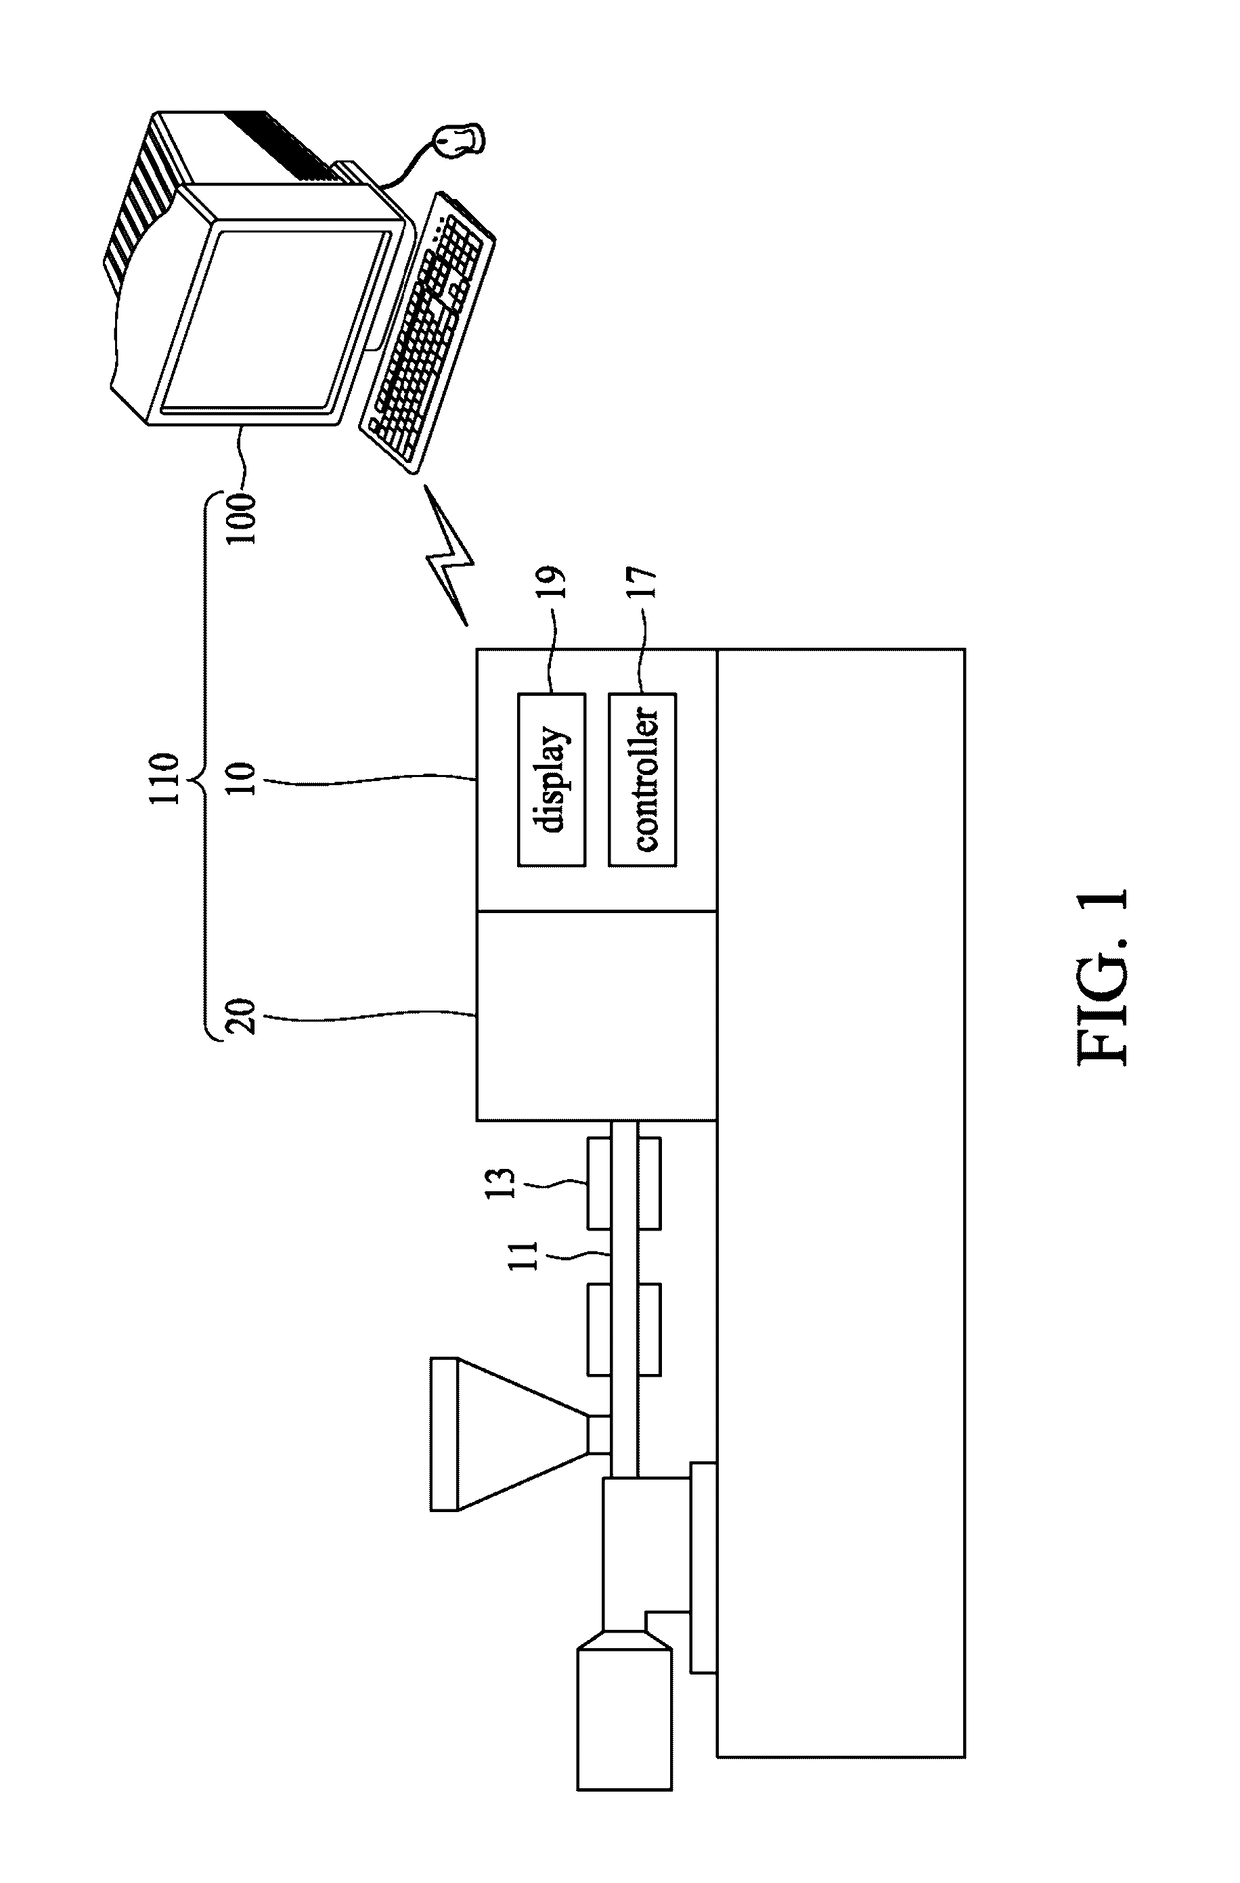 Molding system and method for operating the same